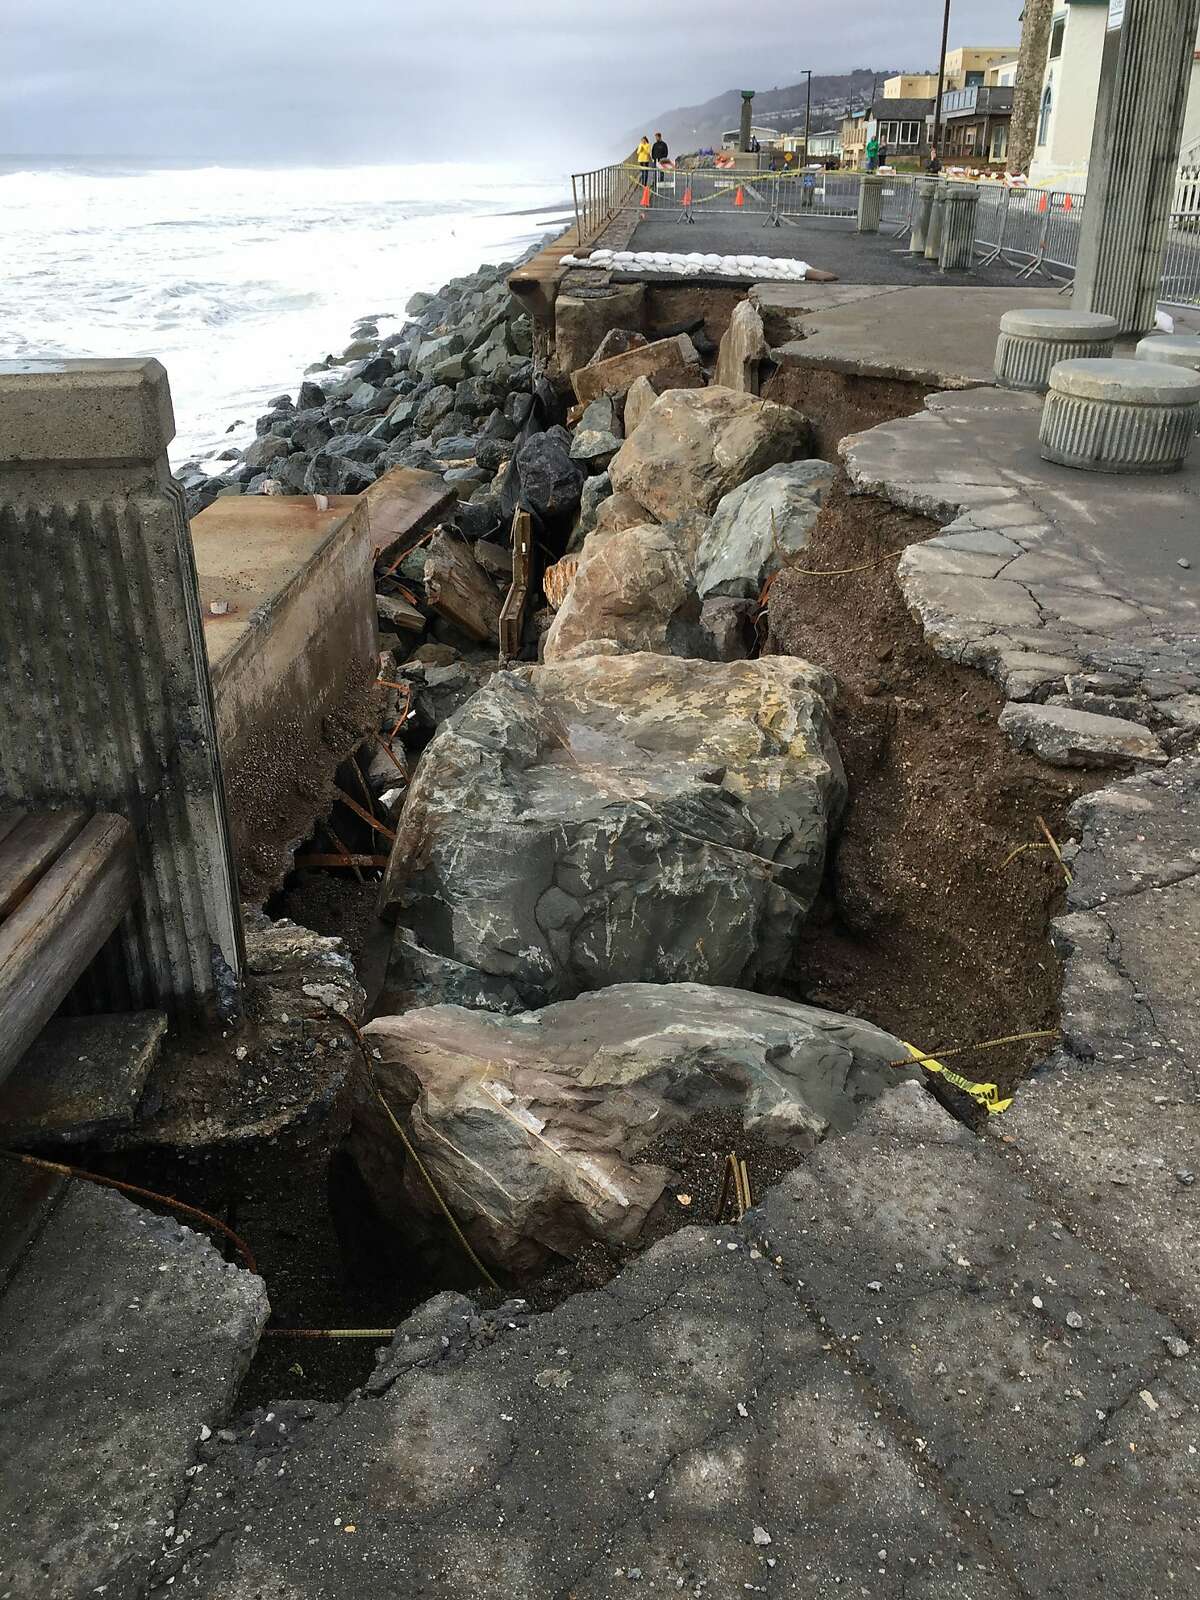 Pacifica In State Of Emergency Over El Niño Storm Damage